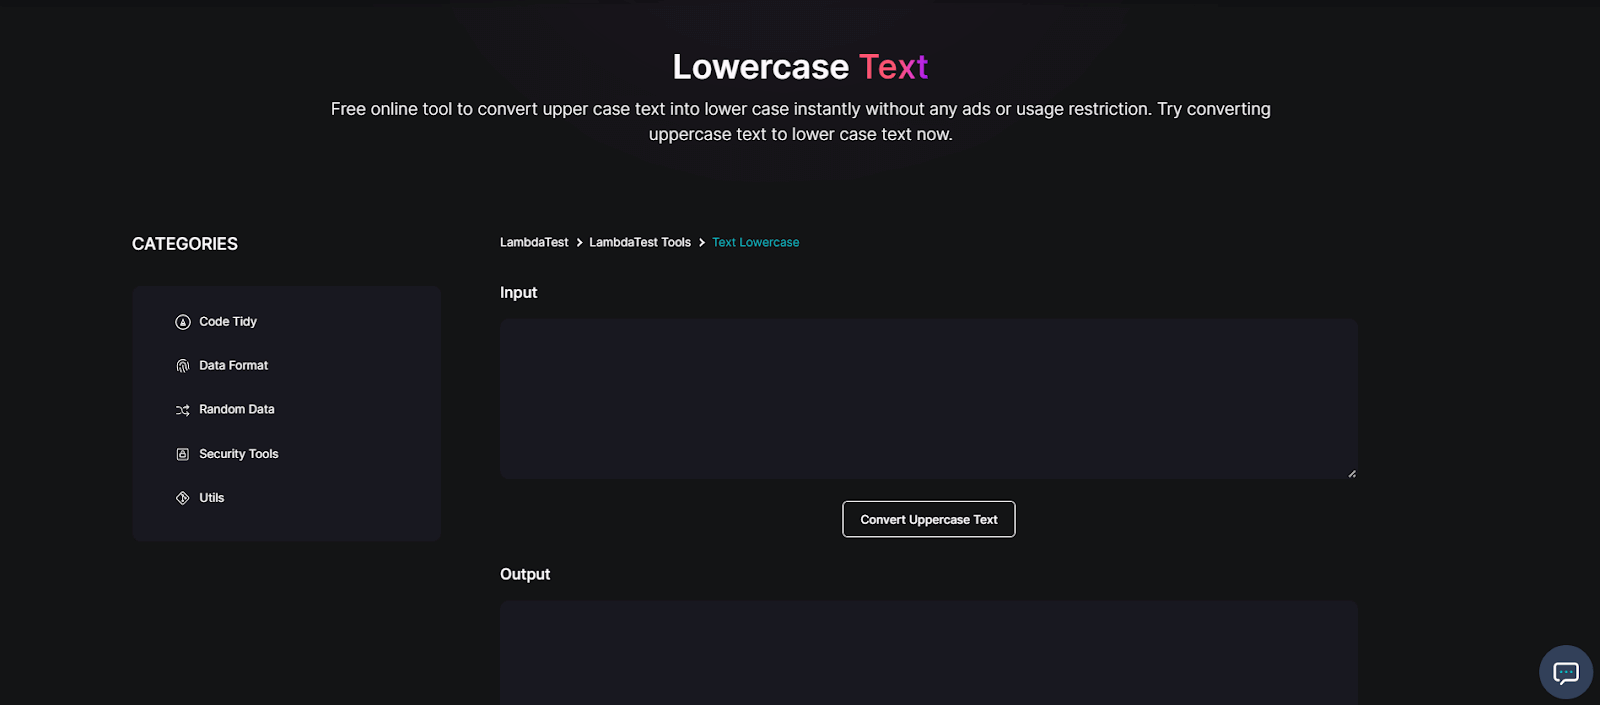 Lowercase Text